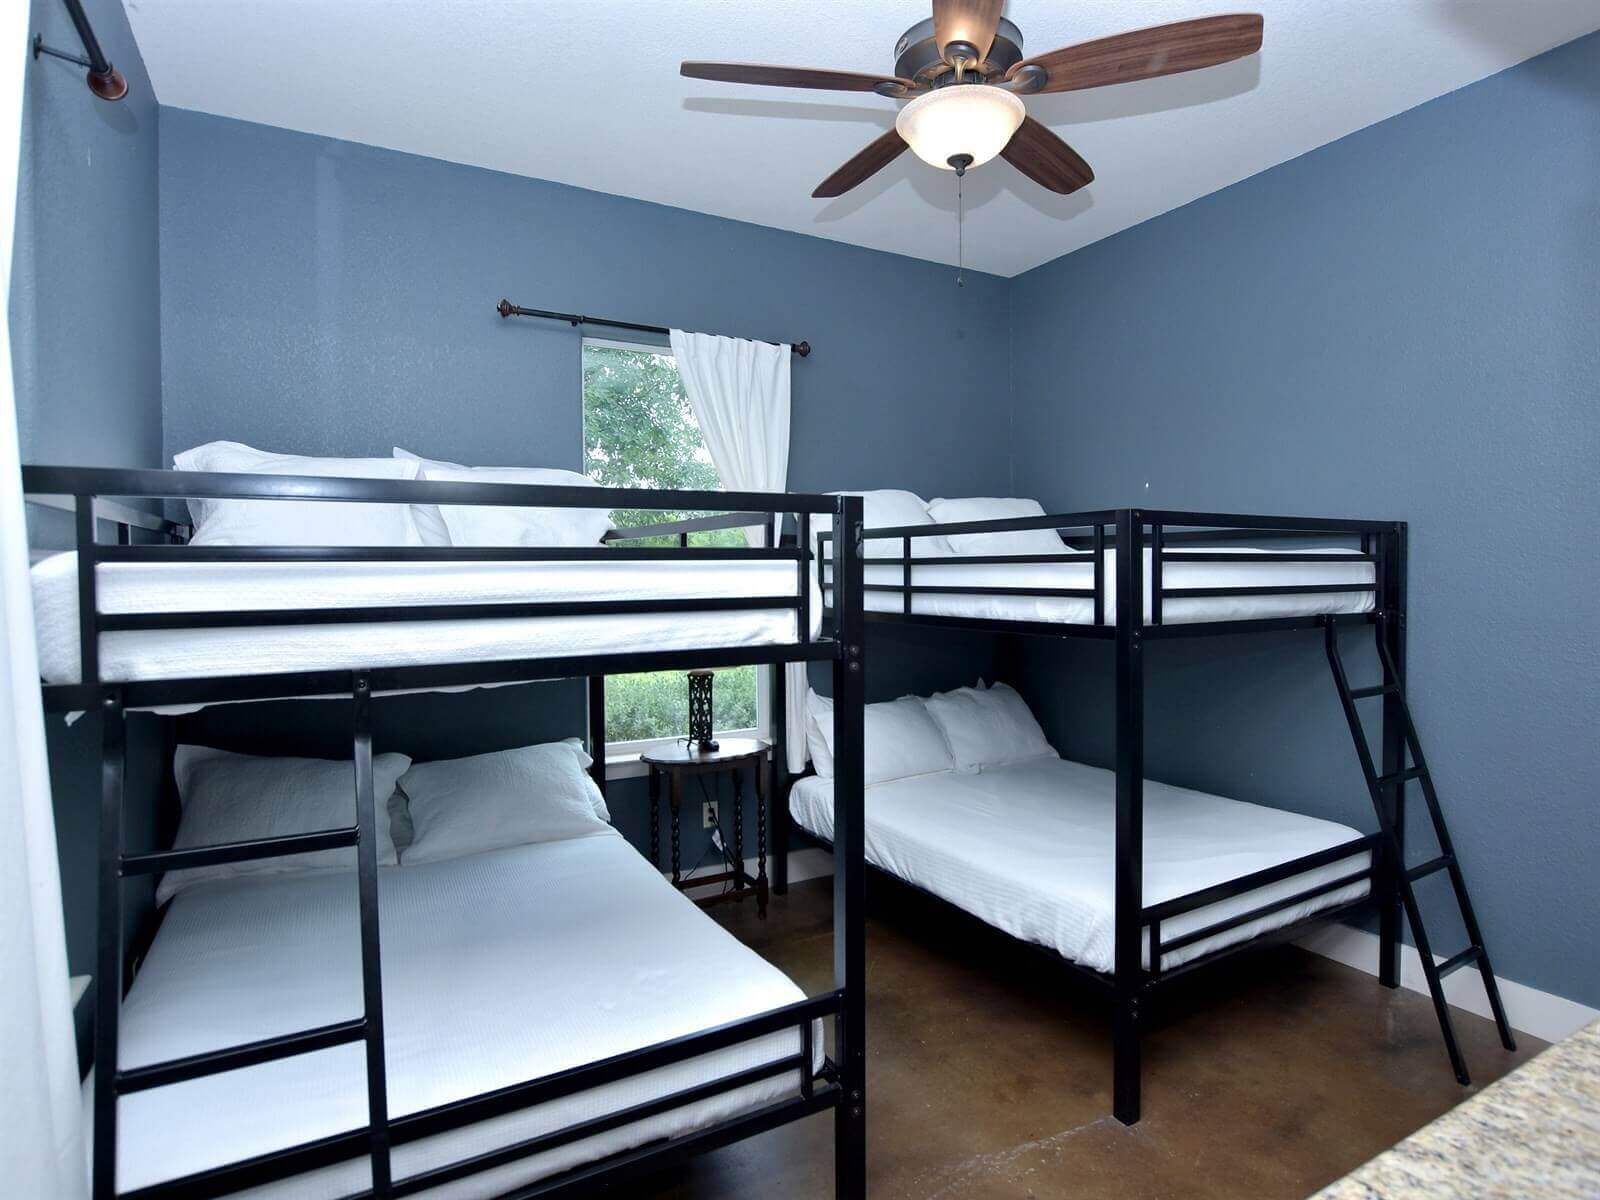 Pecan River Ranch Accommodations - Guest House Bunkroom